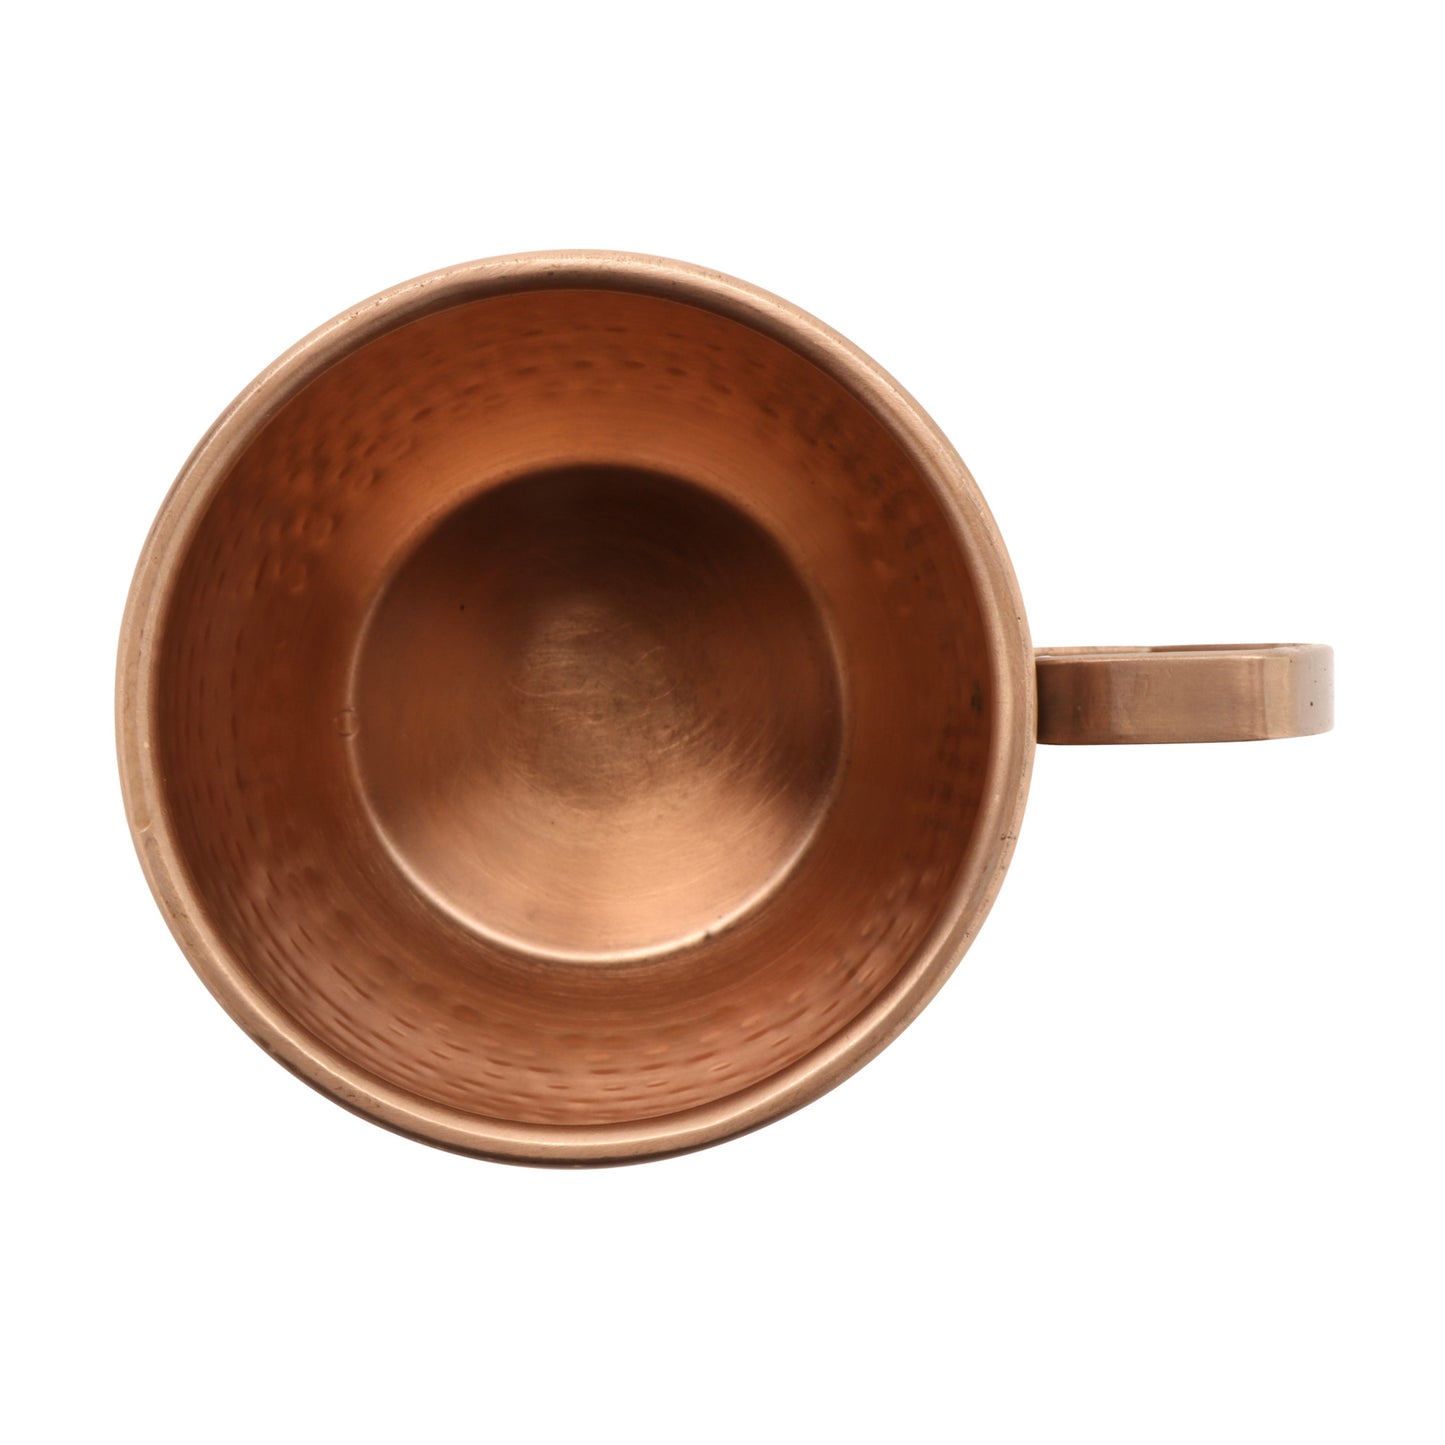 16 oz. Copper-Plated Mug with Hammered Finish, (19 oz. rim-full), 3.25" Top Dia., 4" Tall, G.E.T. Copper Drinkware